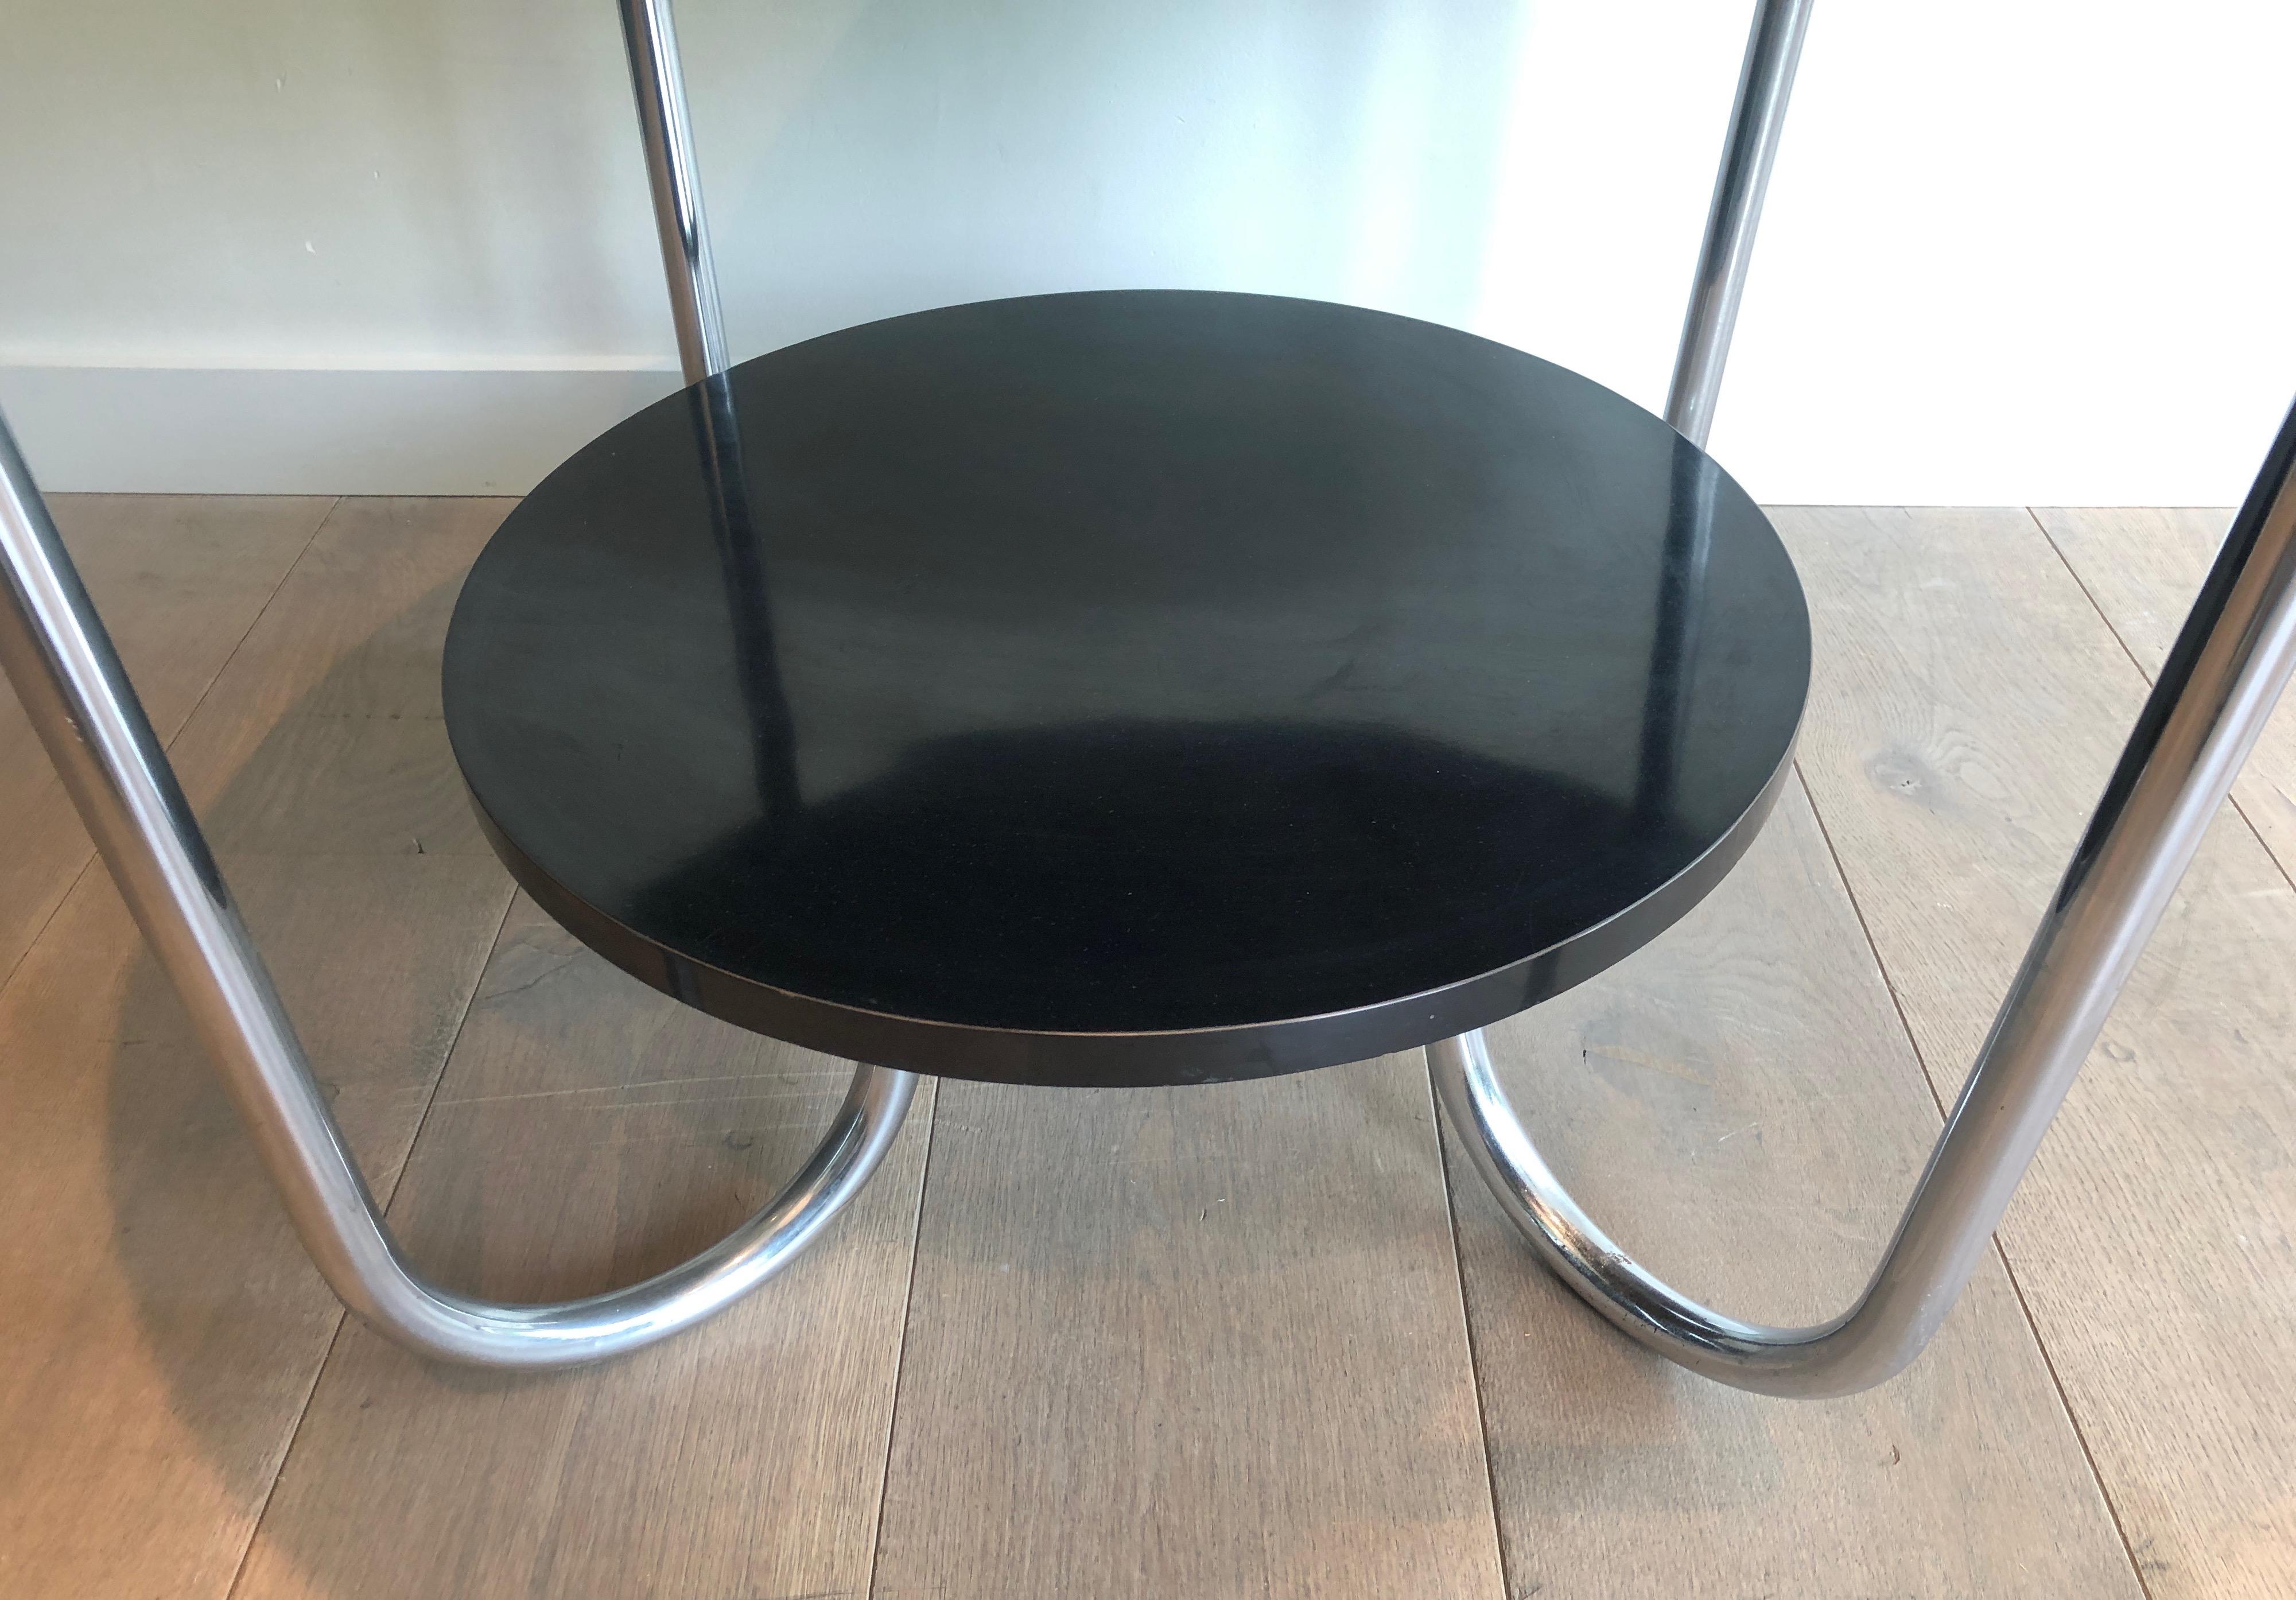 Mid-20th Century Round Black and Chrome Gueridon, French Work, in the Style of Marcel Breuer. Ci